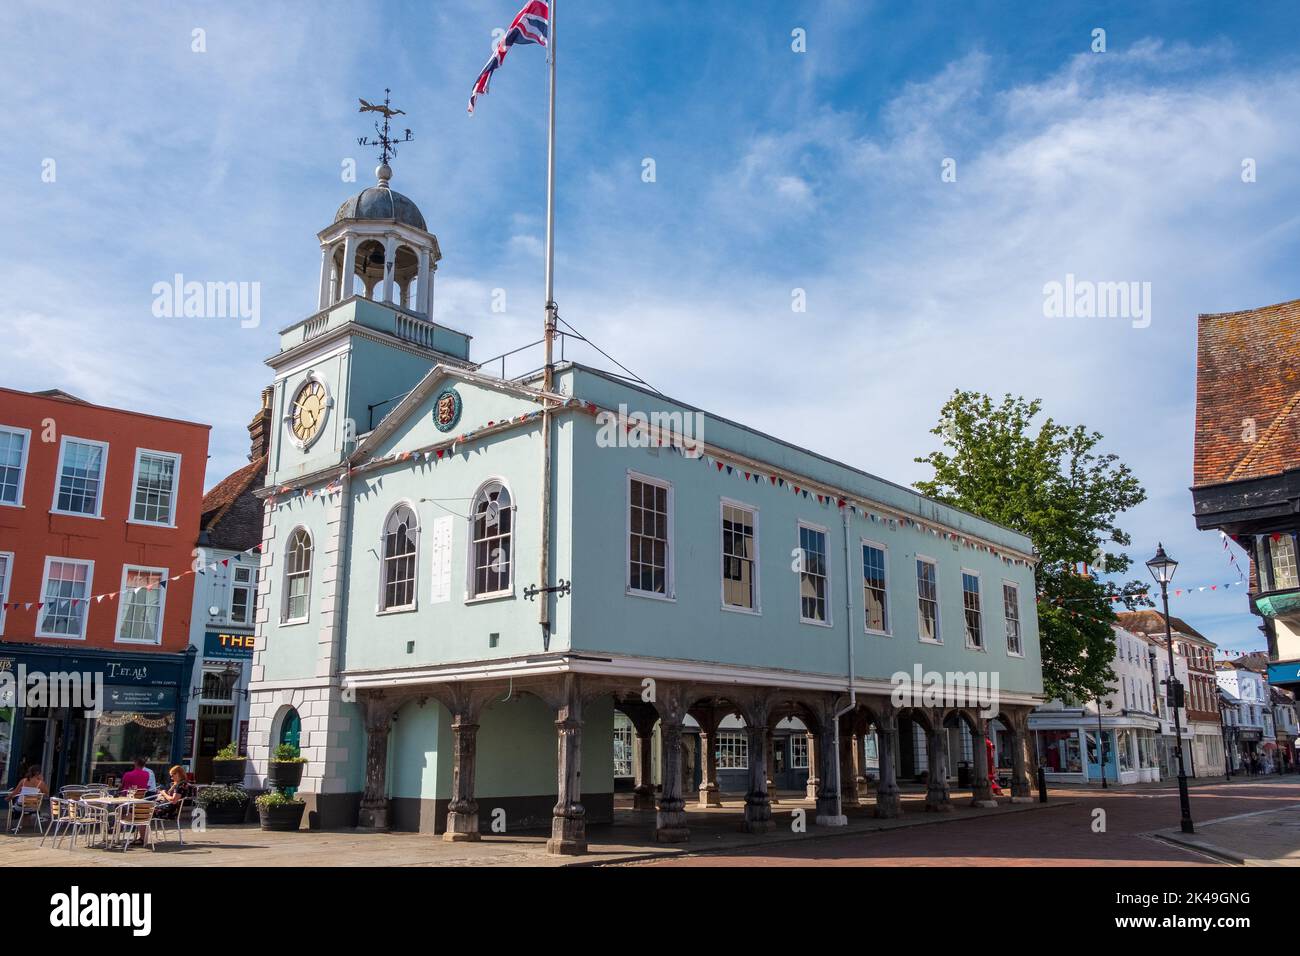 The Guildhall, in the town market place of Faversham, Kent Stock Photo